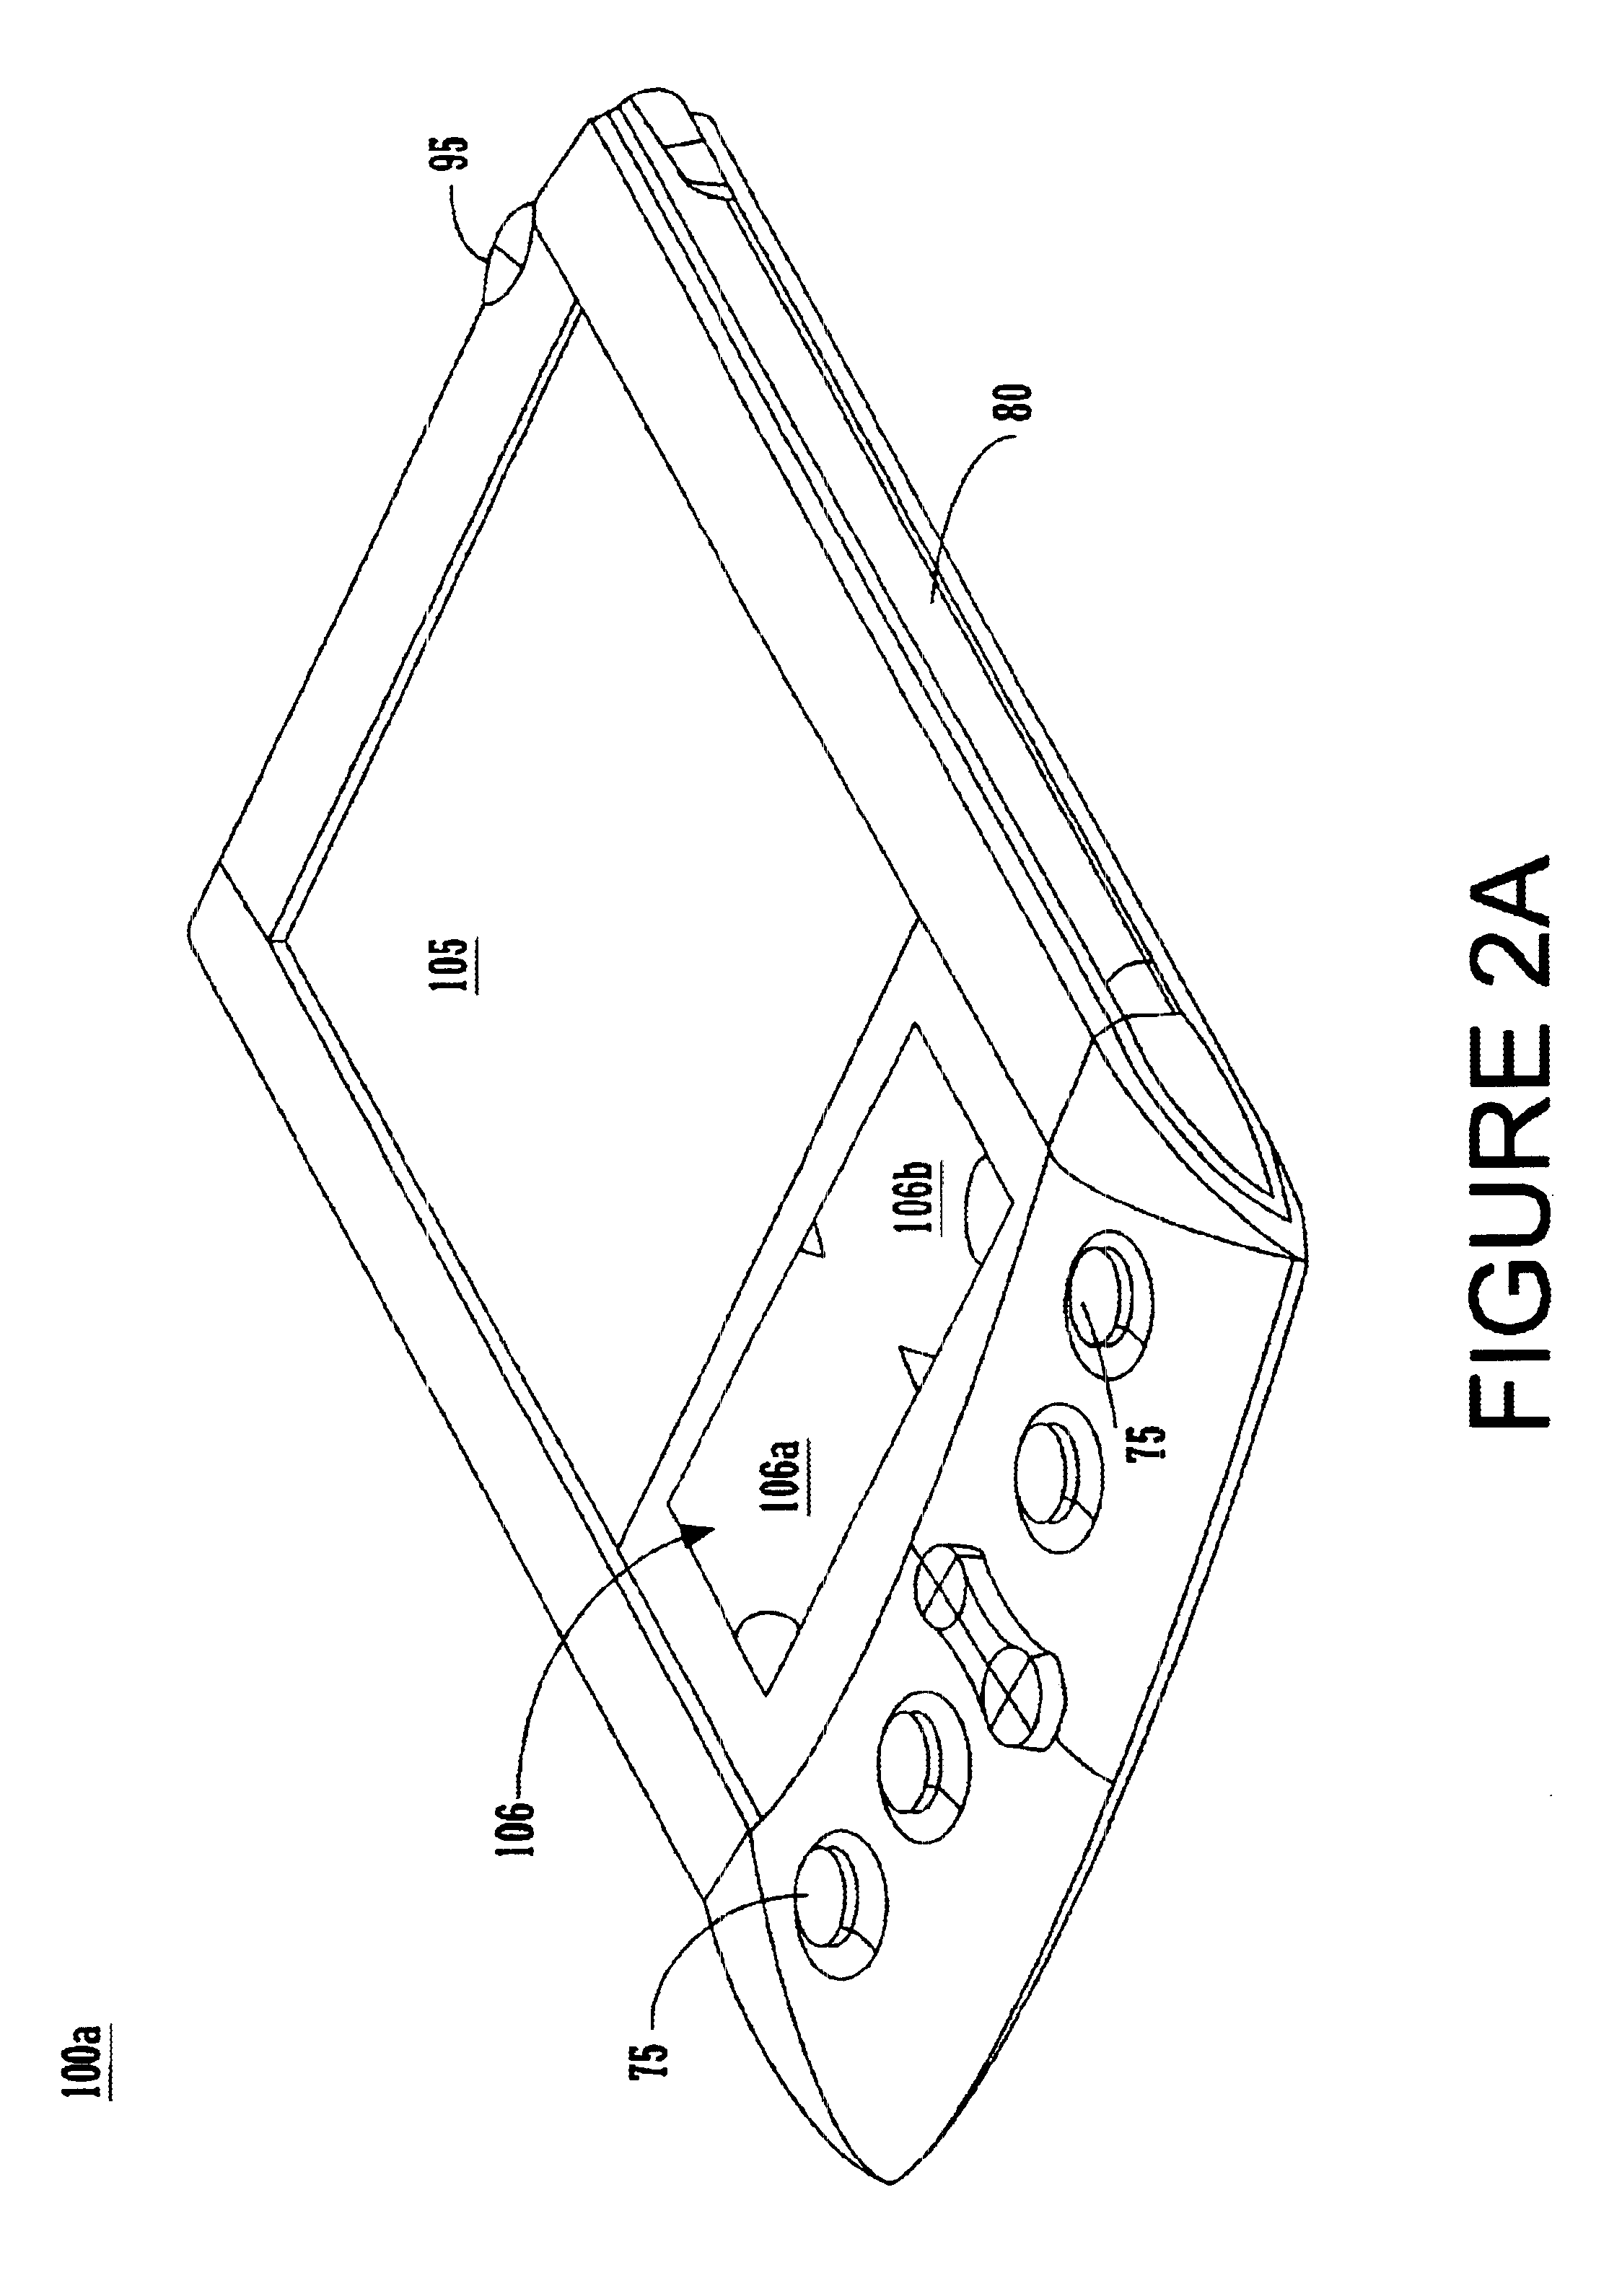 System for indentifying a peripheral device by sending an inquiry thereto after receiving an interrupt notification message if the interrupt and communication port meet predetermined conditions